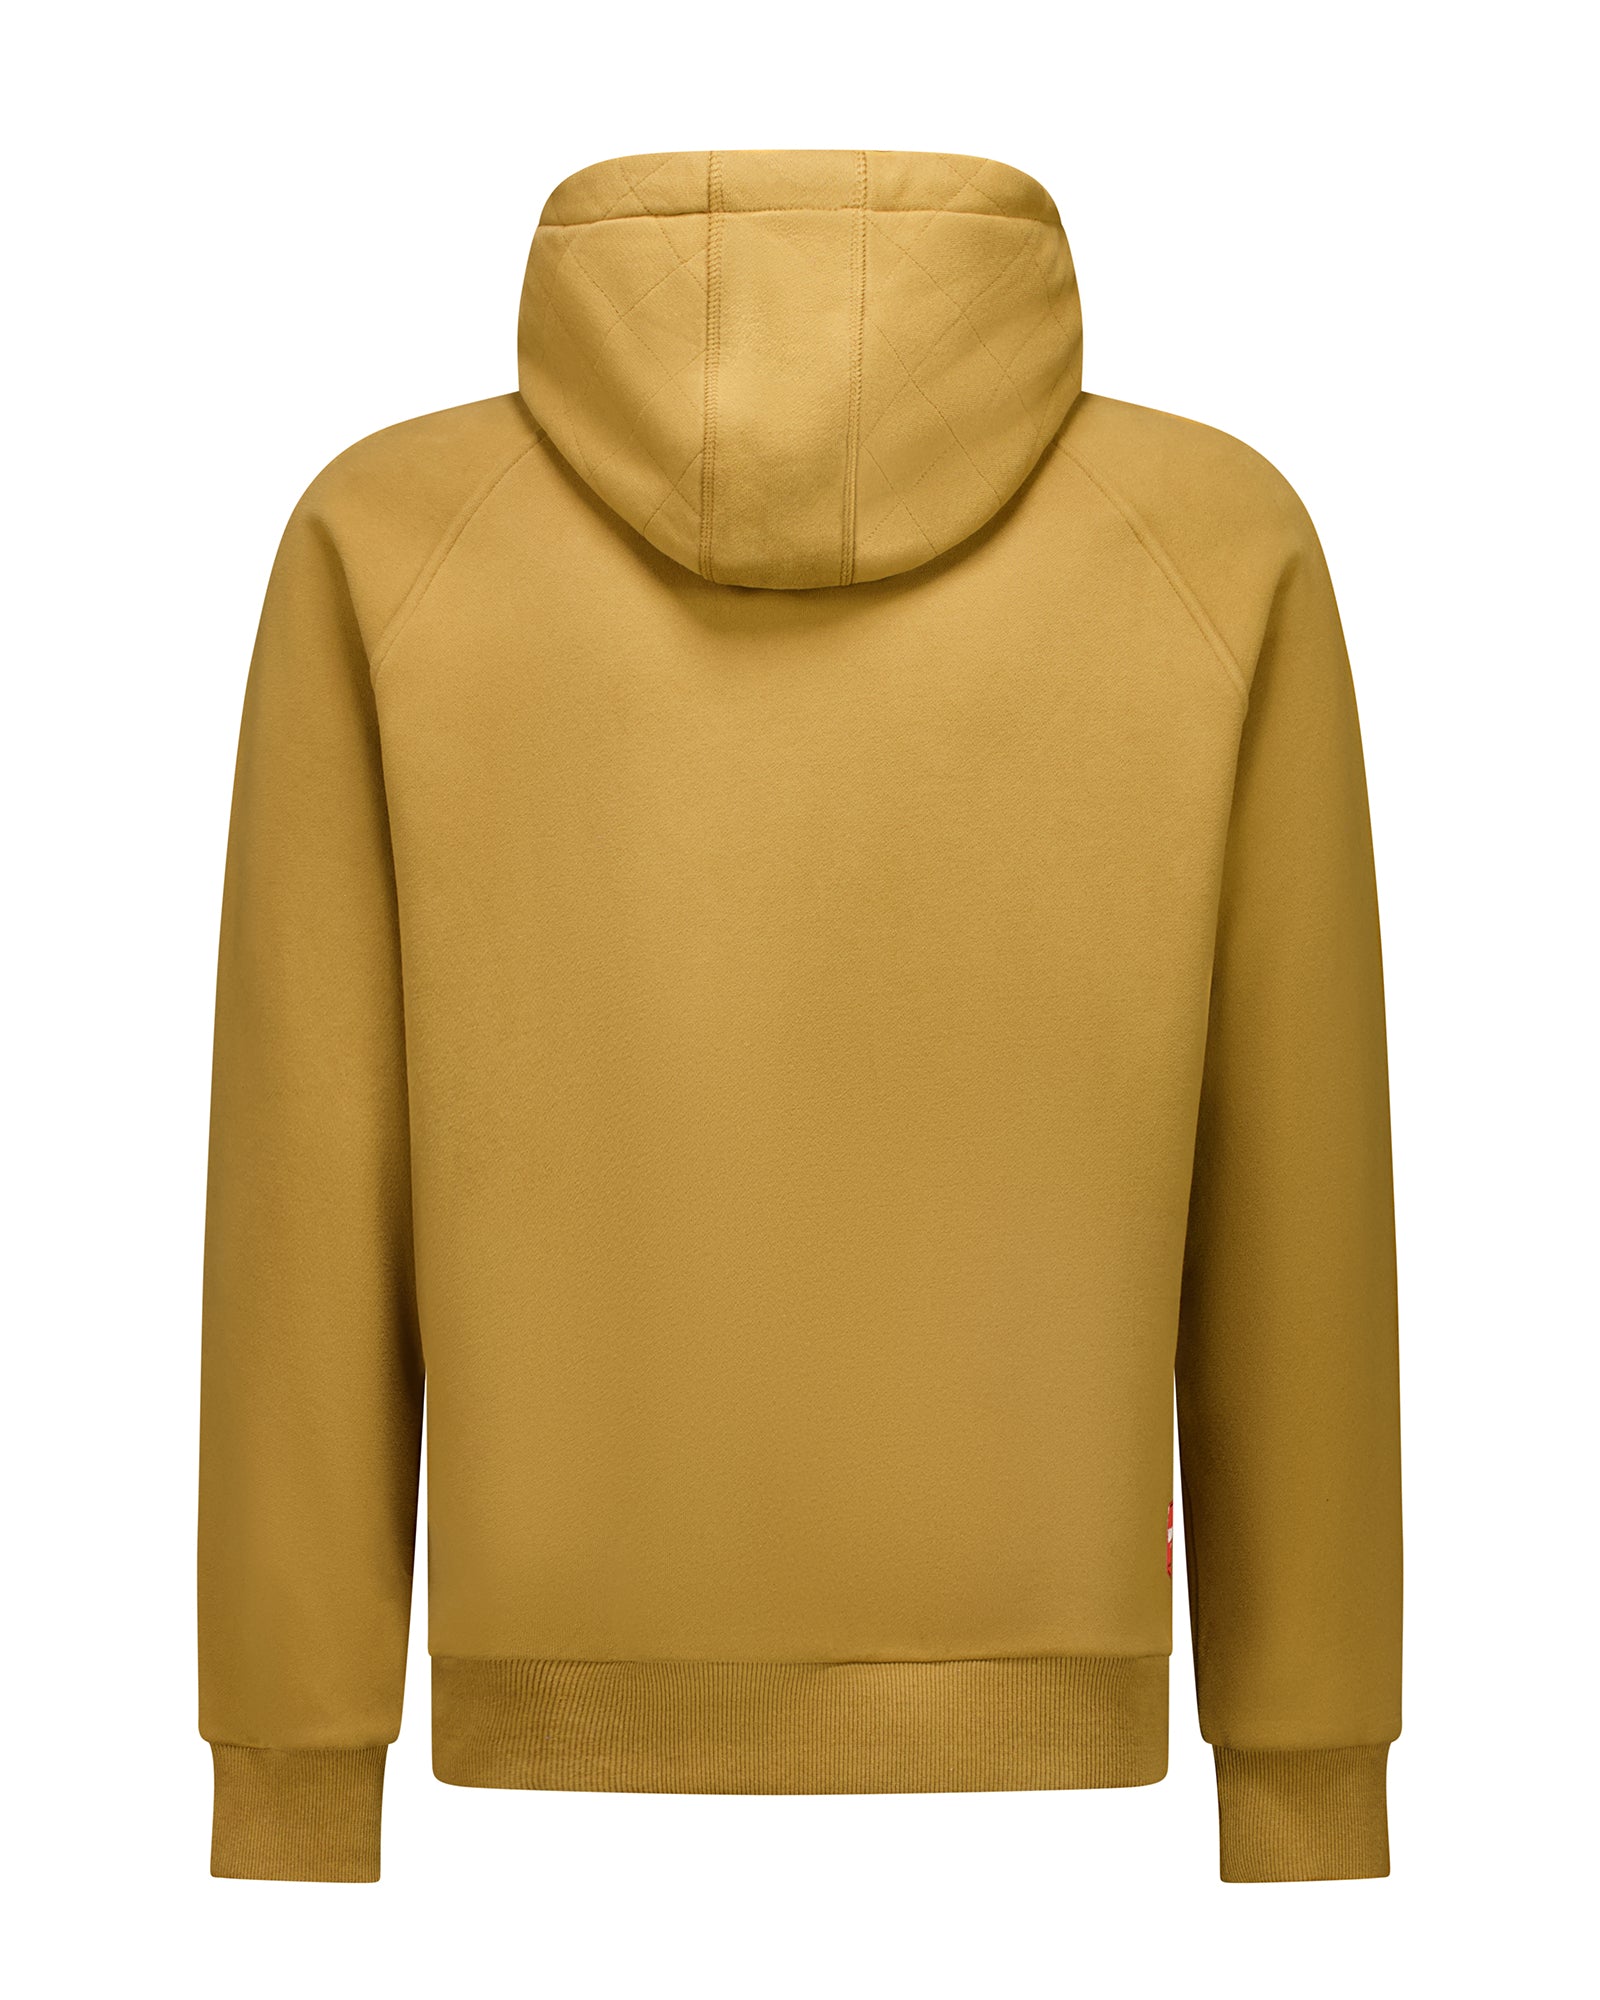 "Exhausted" Oversize Hoodie